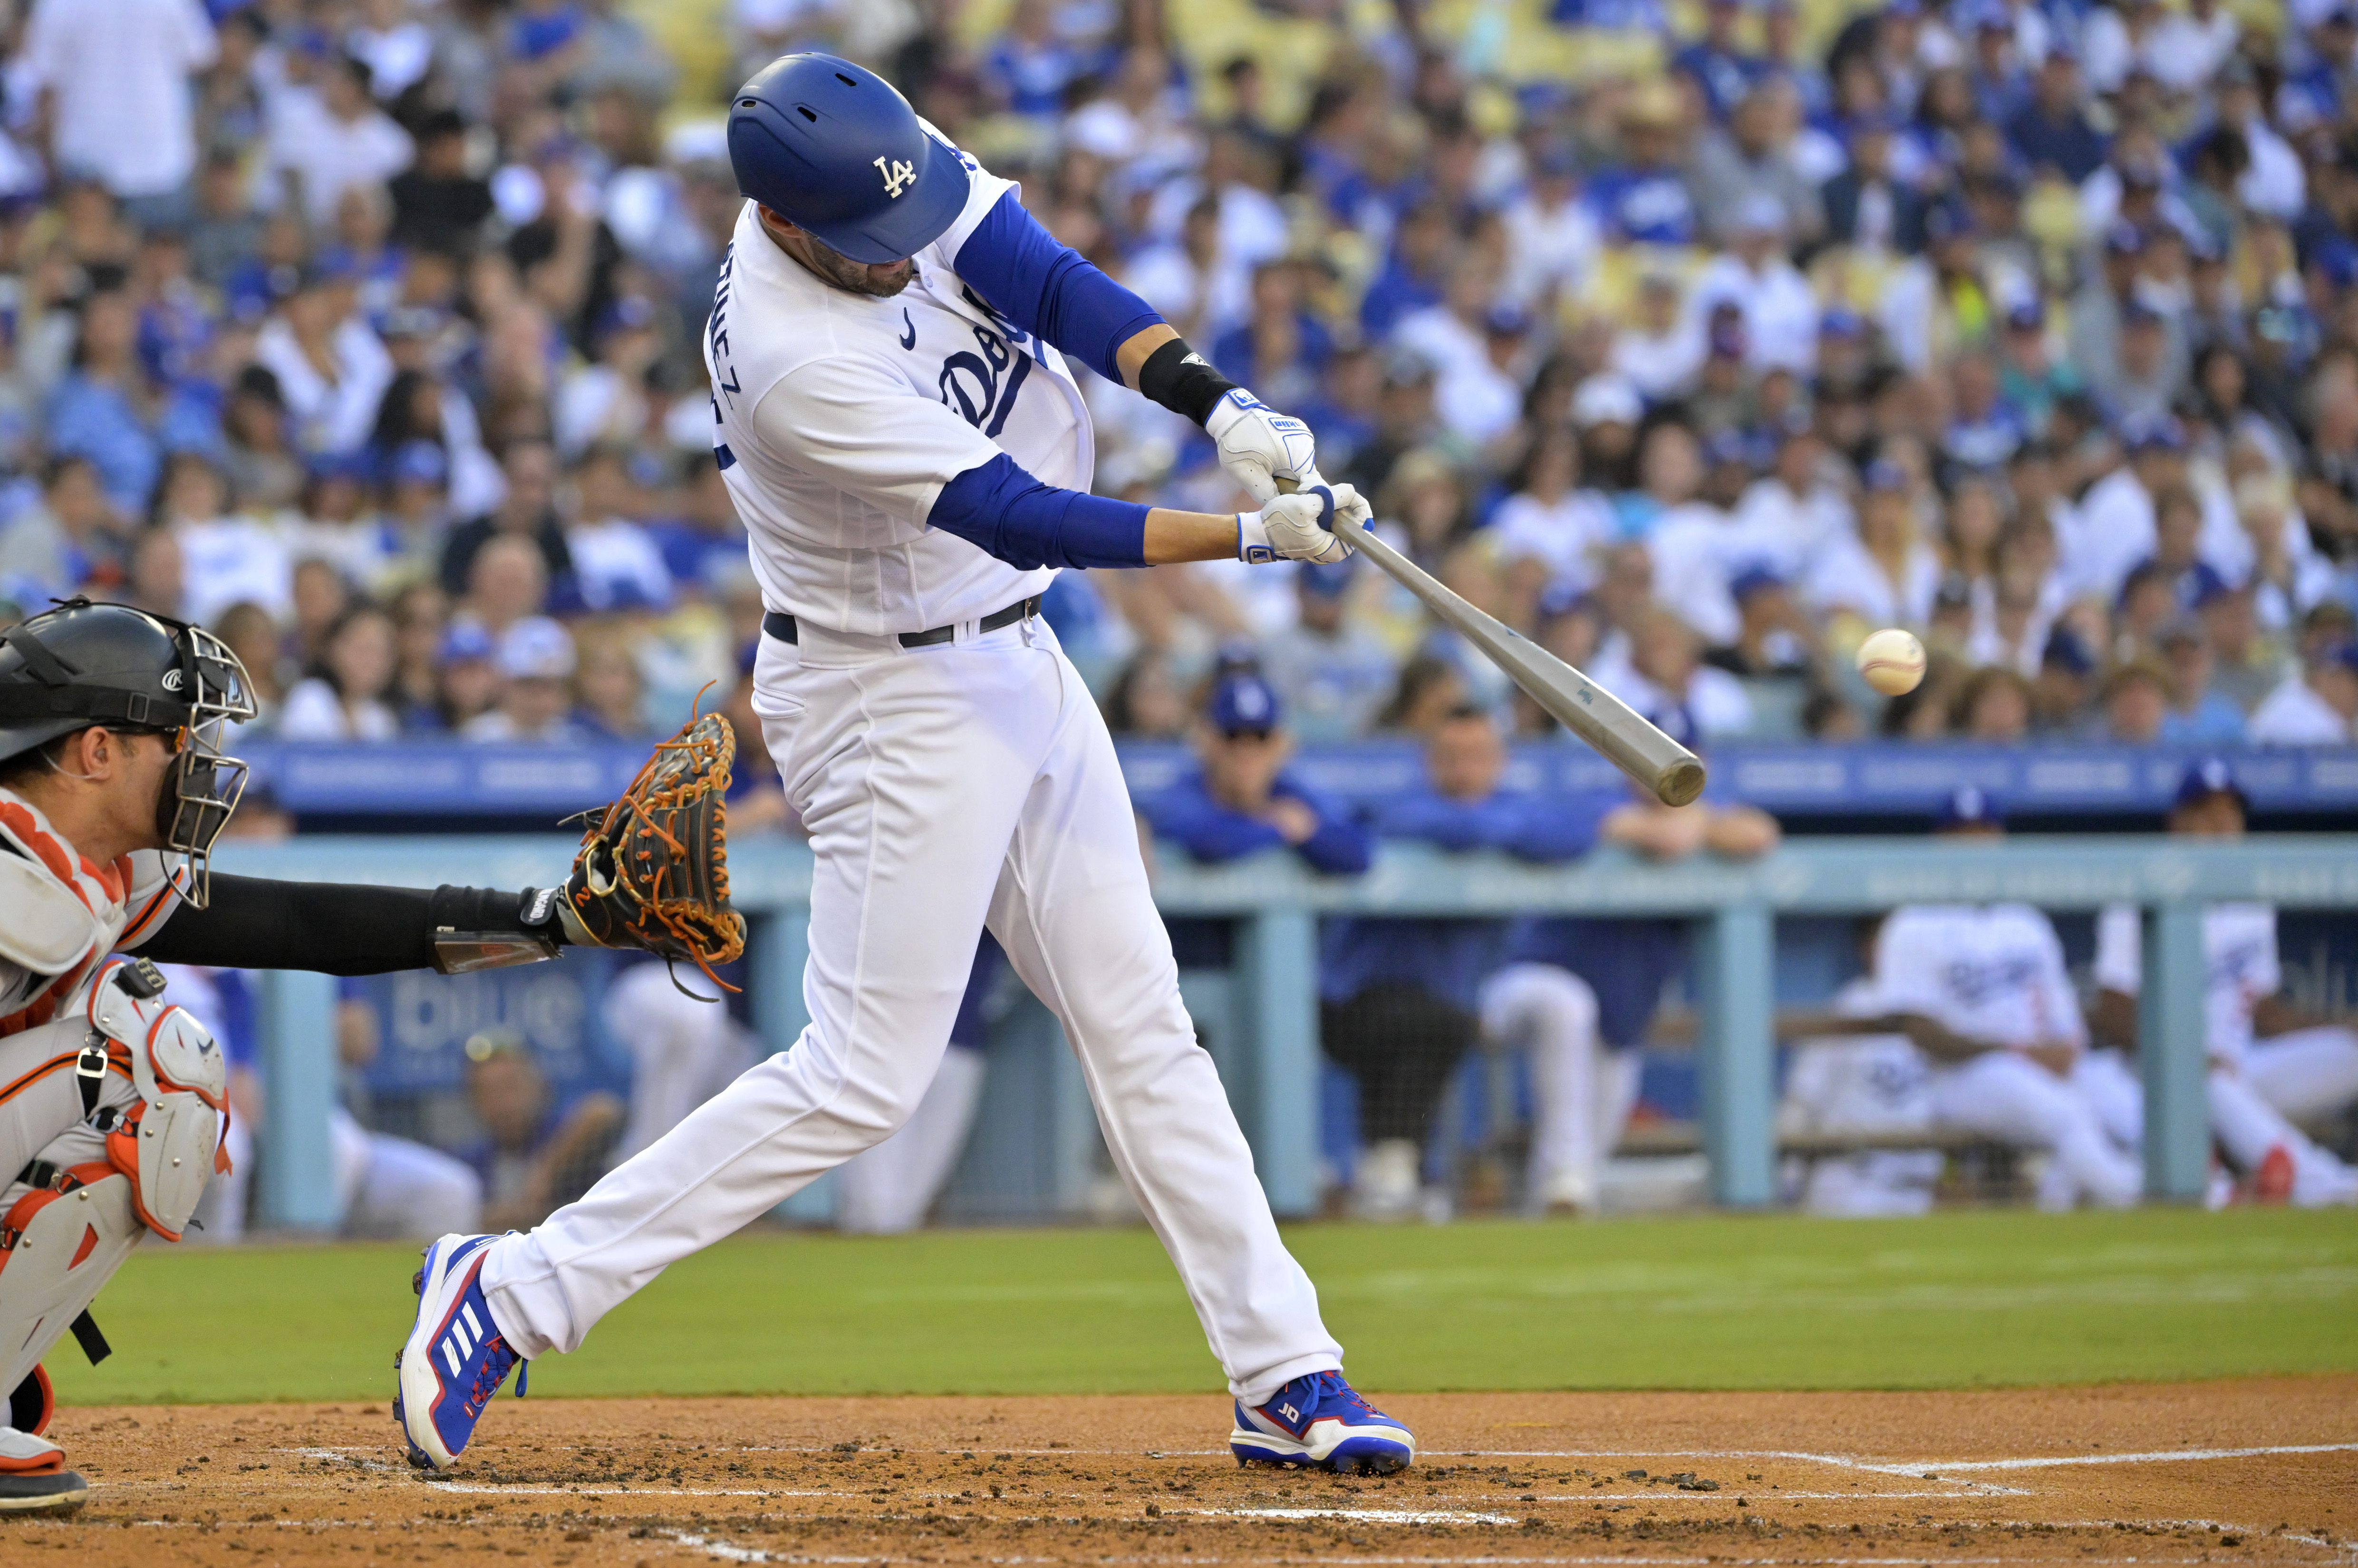 Chris Taylor Adds To Unexpected Dodgers Legacy With Walkoff Home